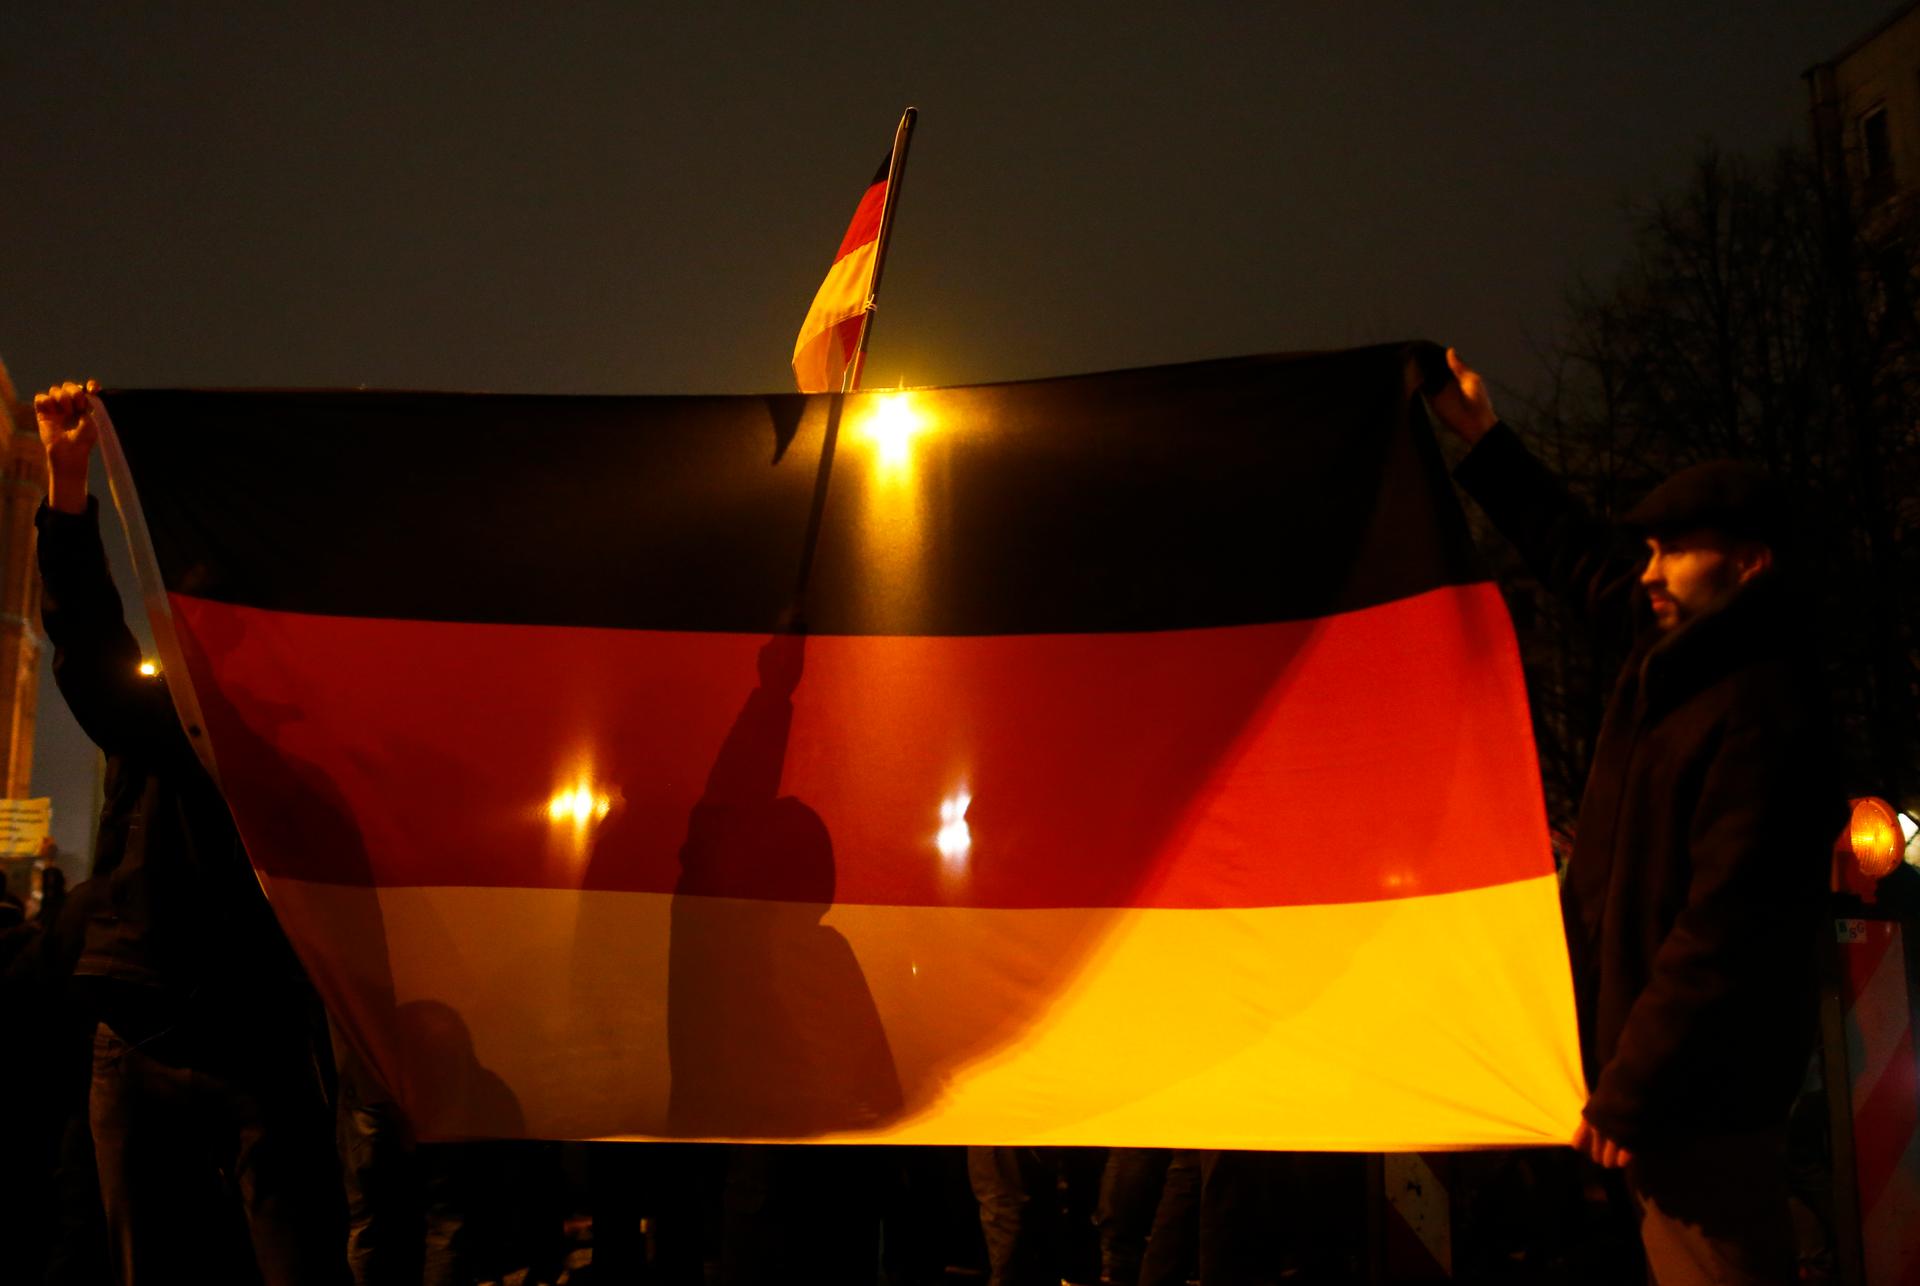 Participants in a grassroots anti-Muslim movement hold German flags during a demonstration in Berlin. The rise of the group, Patriotic Europeans Against the Islamisation of the West, has shaken Germany's political establishment.